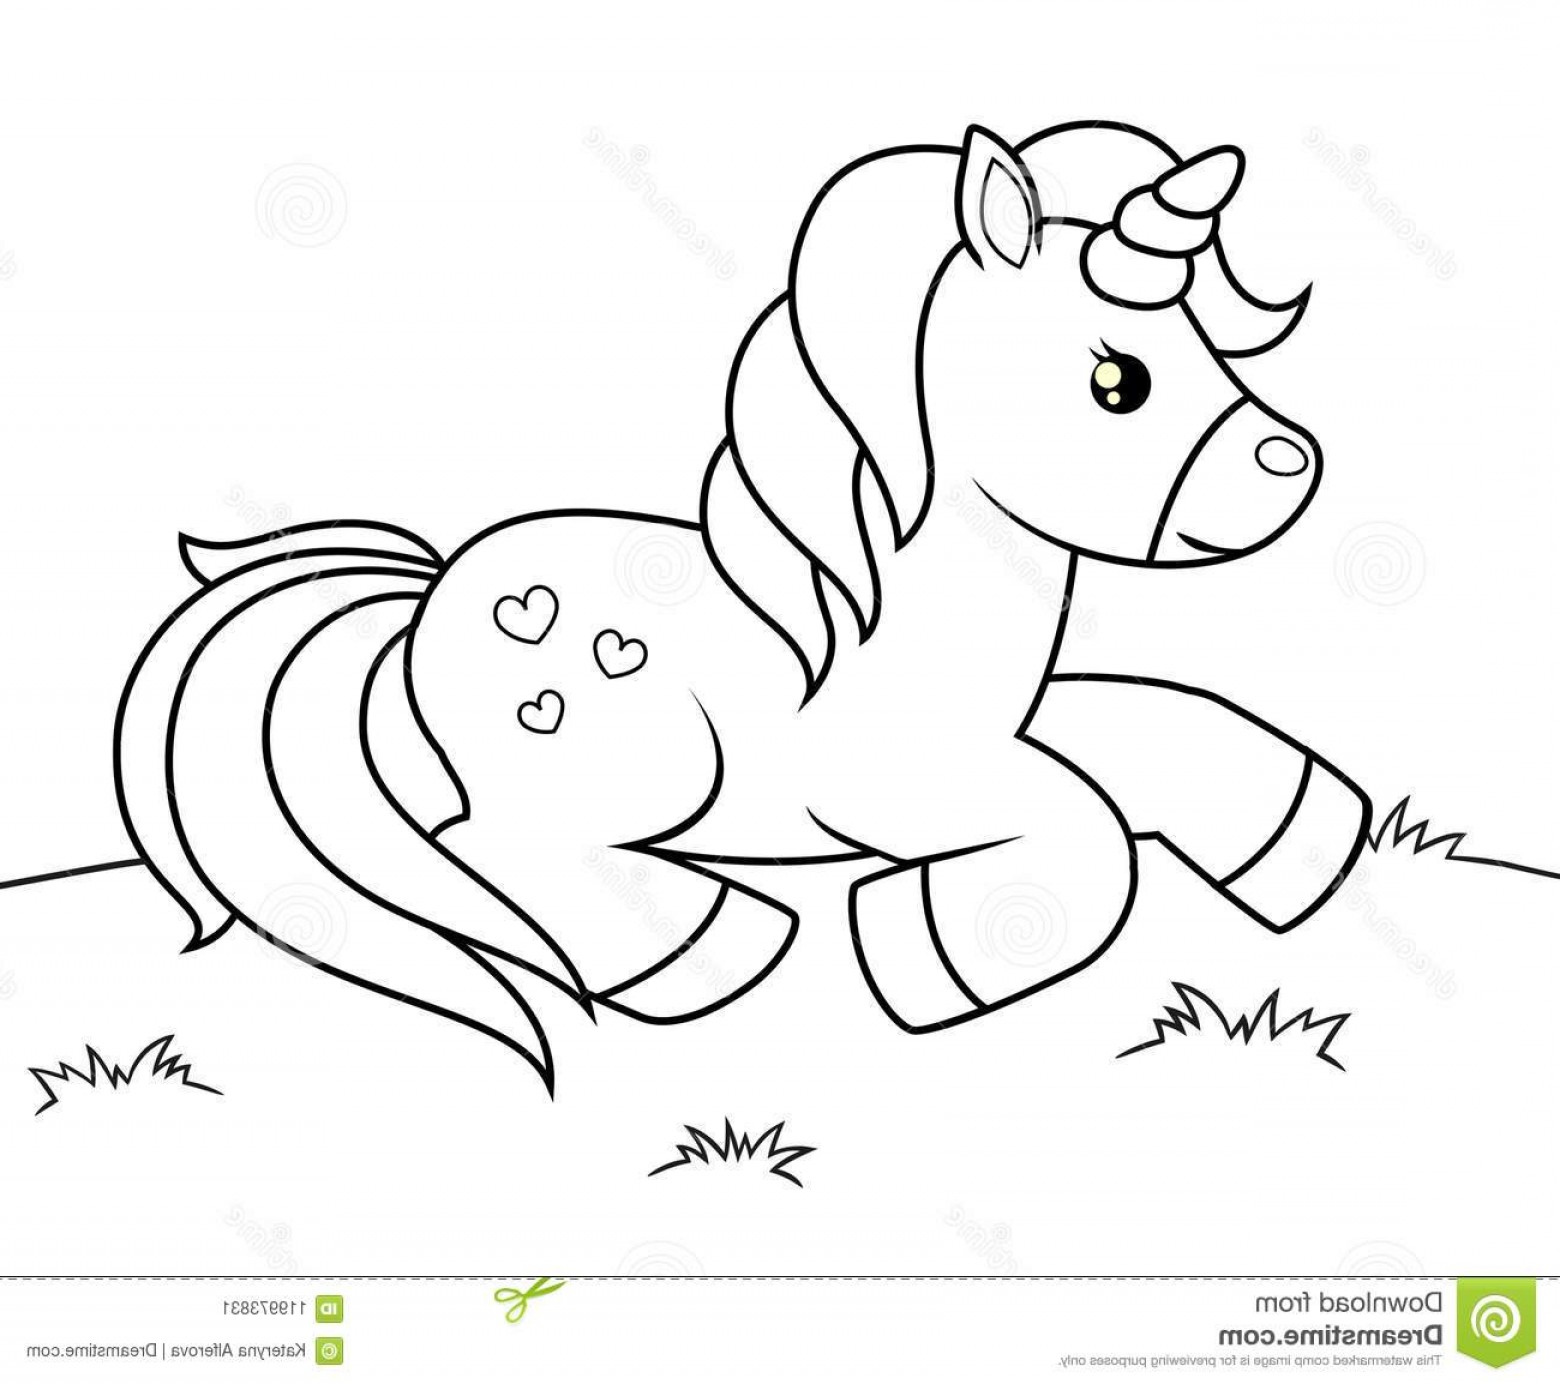 Download Unicorn Black And White Vector at Vectorified.com ...